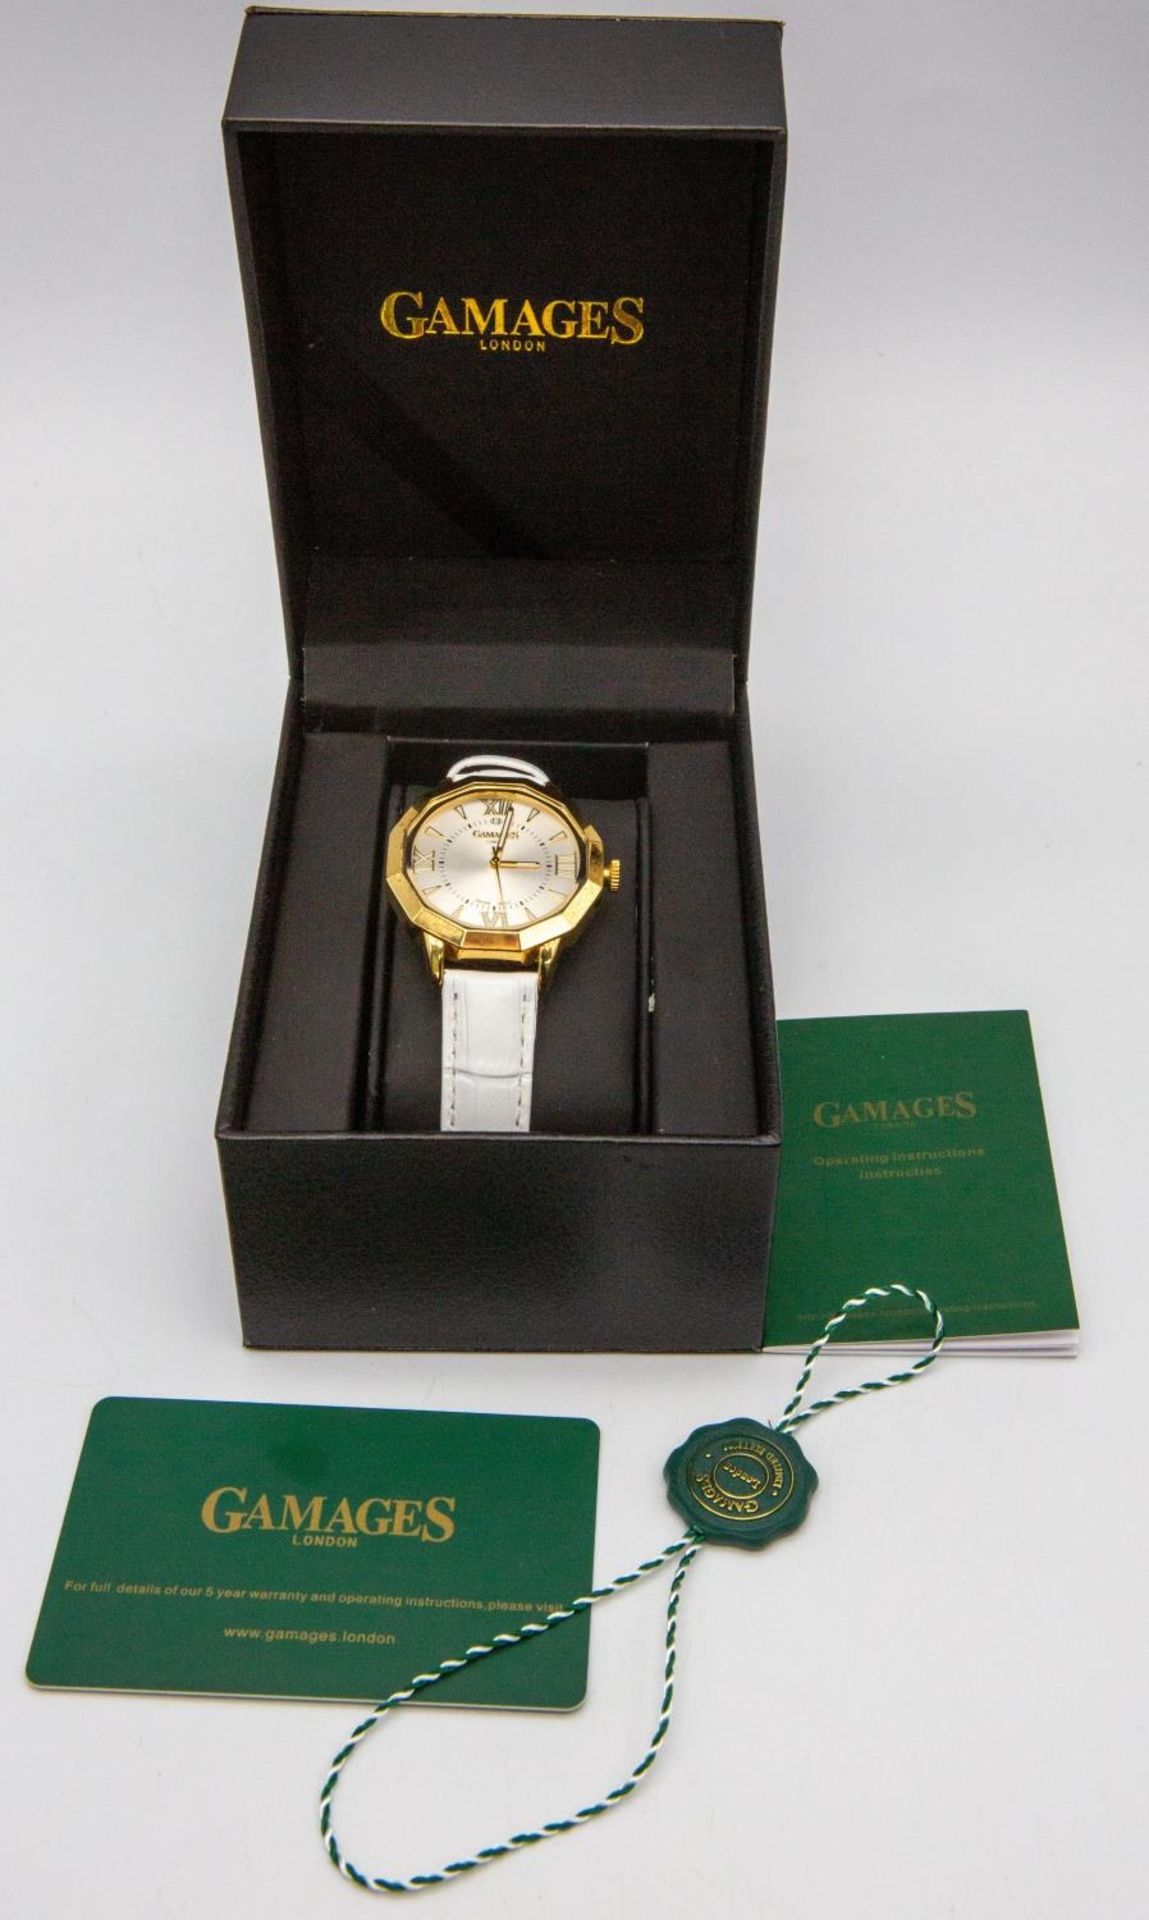 A Gamages of London Quartz Ladies Watch. White leather strap. Gilded case - 38mm. Silver tone - Image 3 of 5